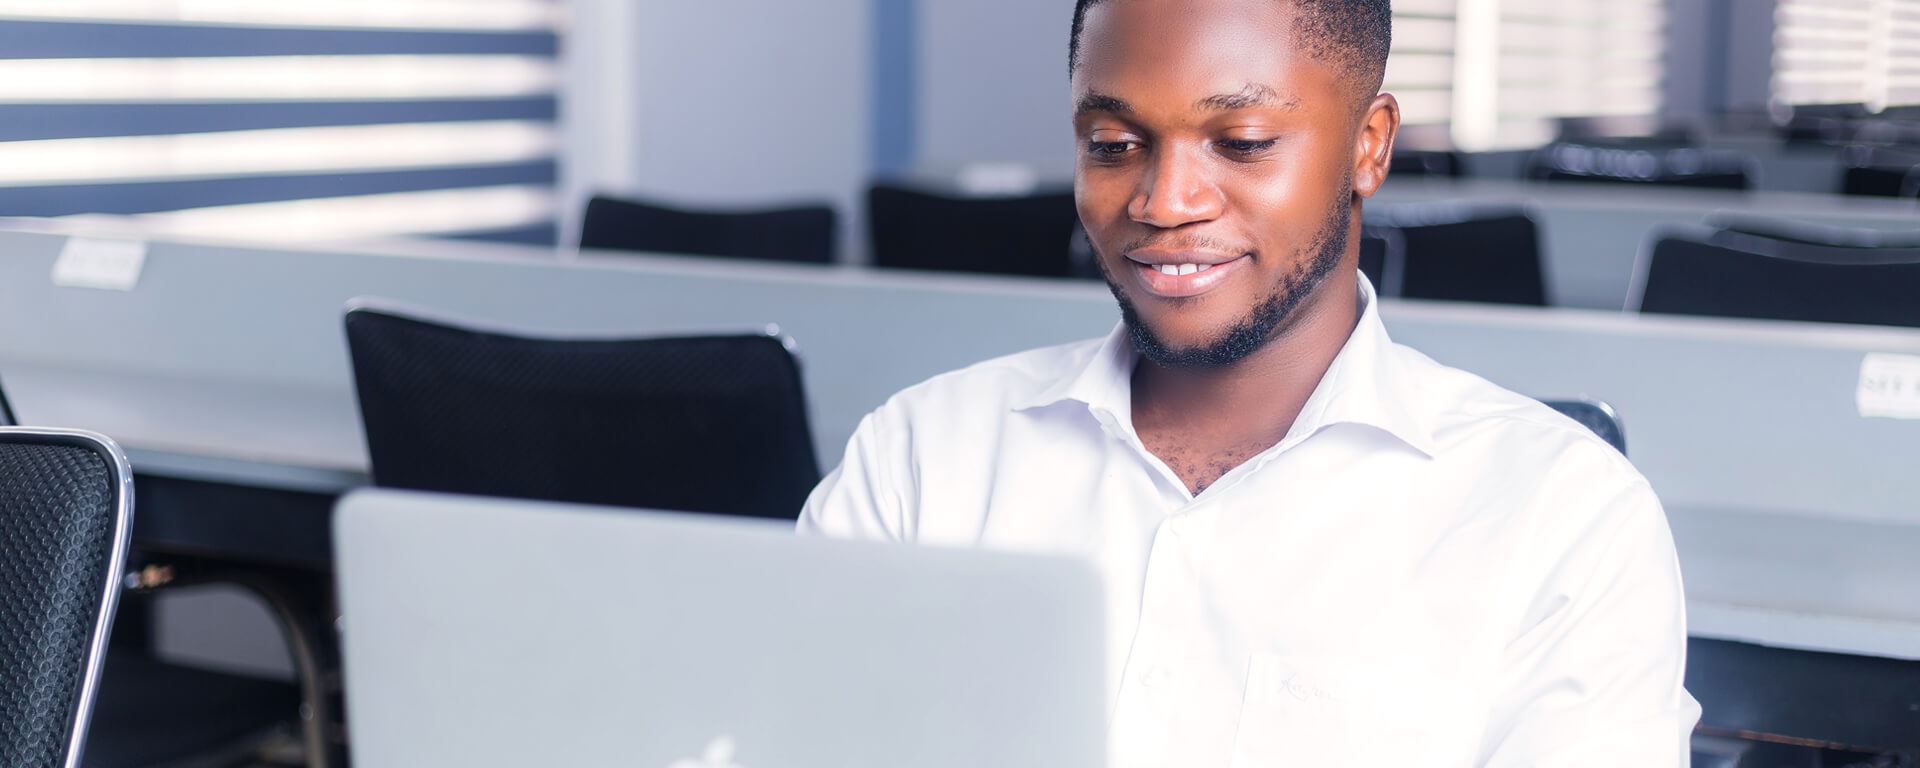 distance education courses in knust